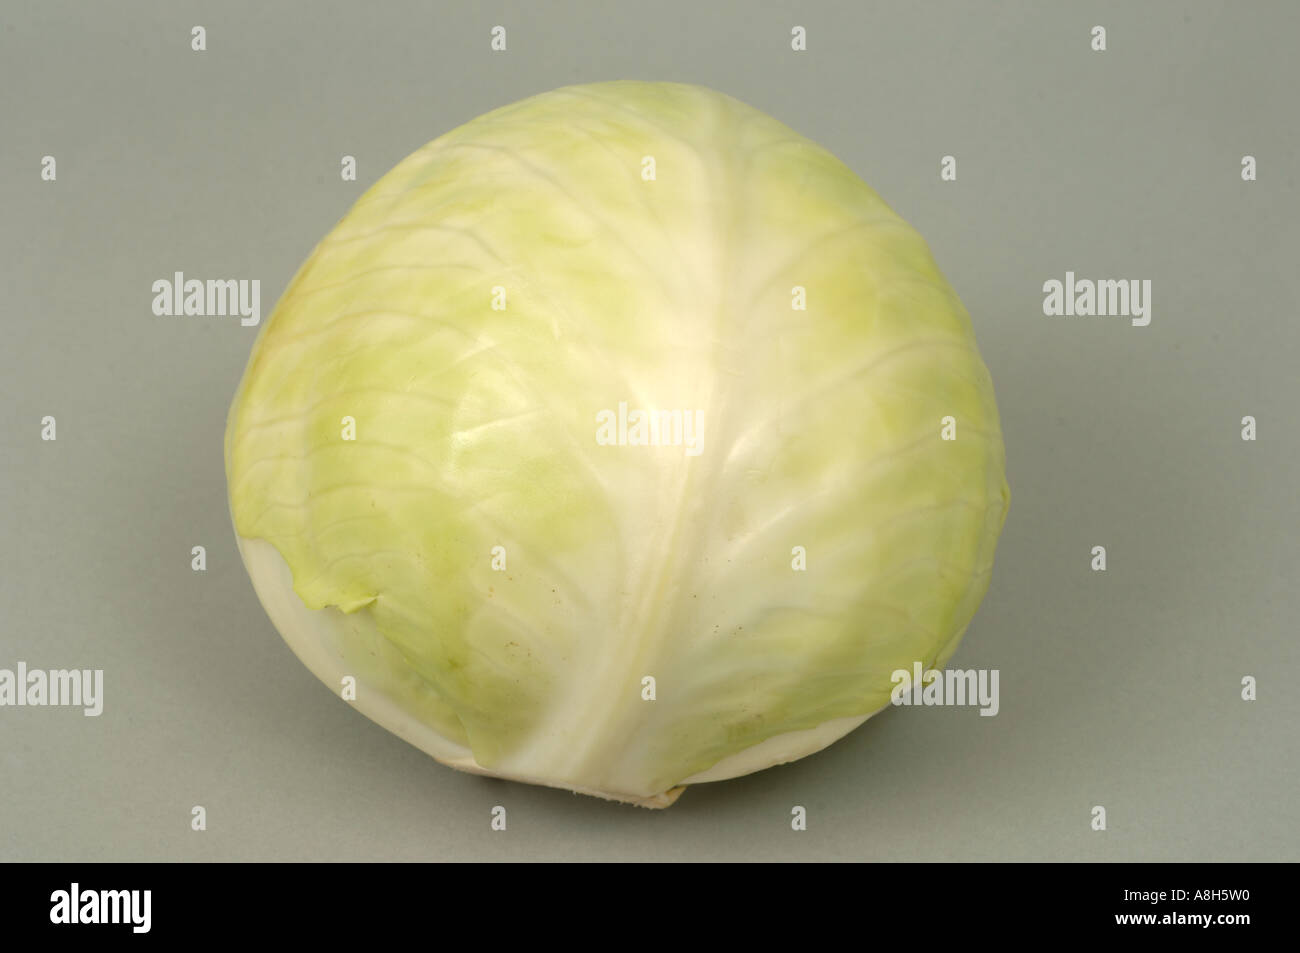 Vegetable produce typical supermarket bought round cabbage head Stock Photo